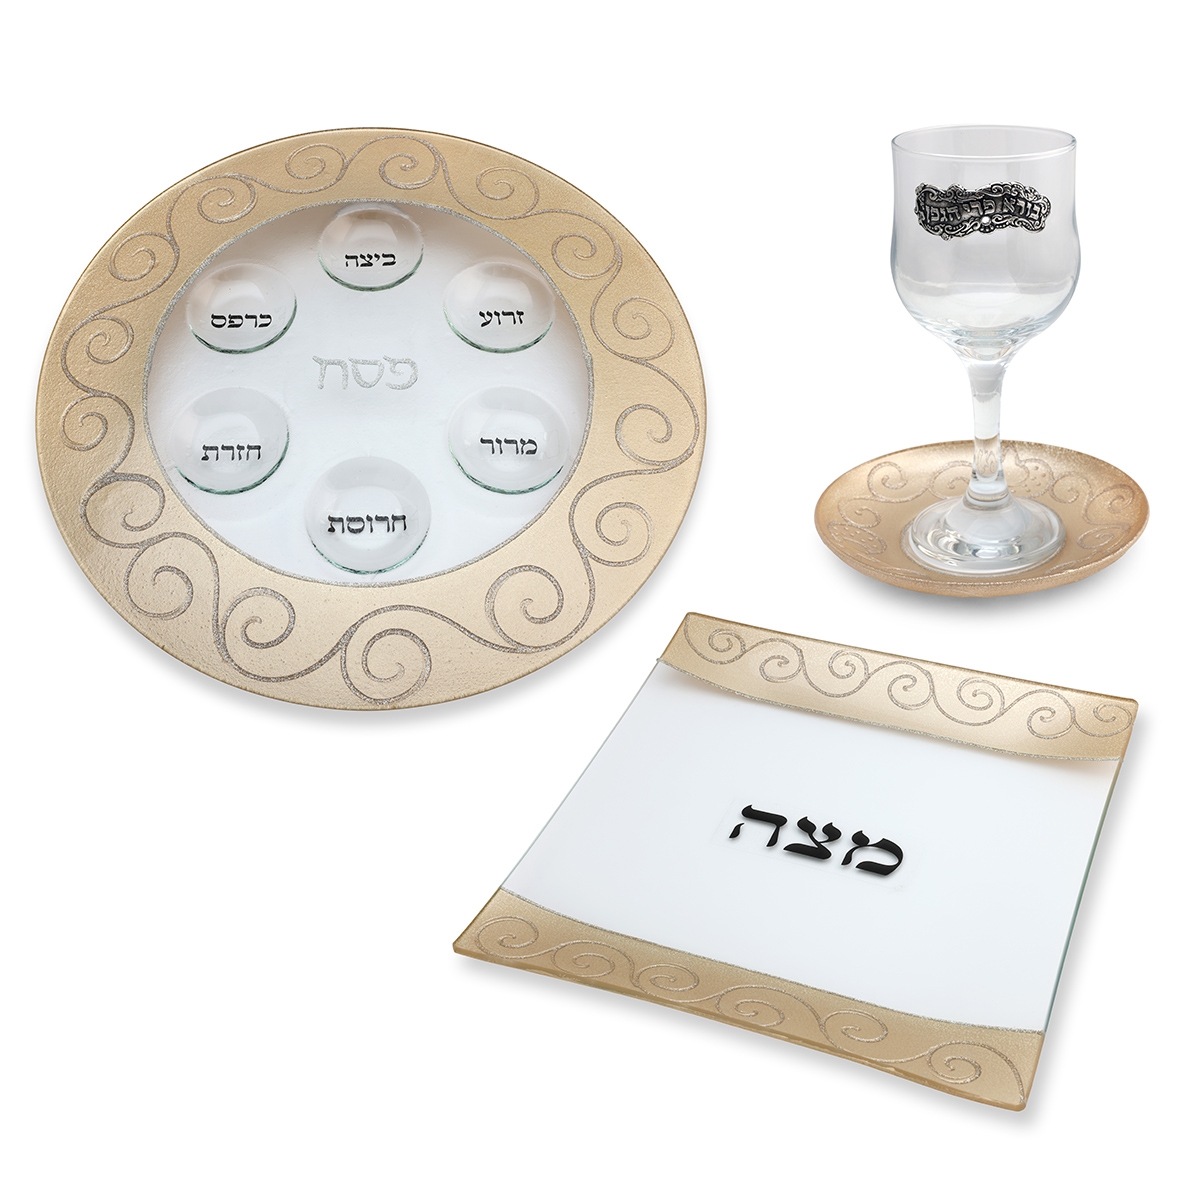 Passover Seder Necessities Set By Lily Art - Ornate Design - 1